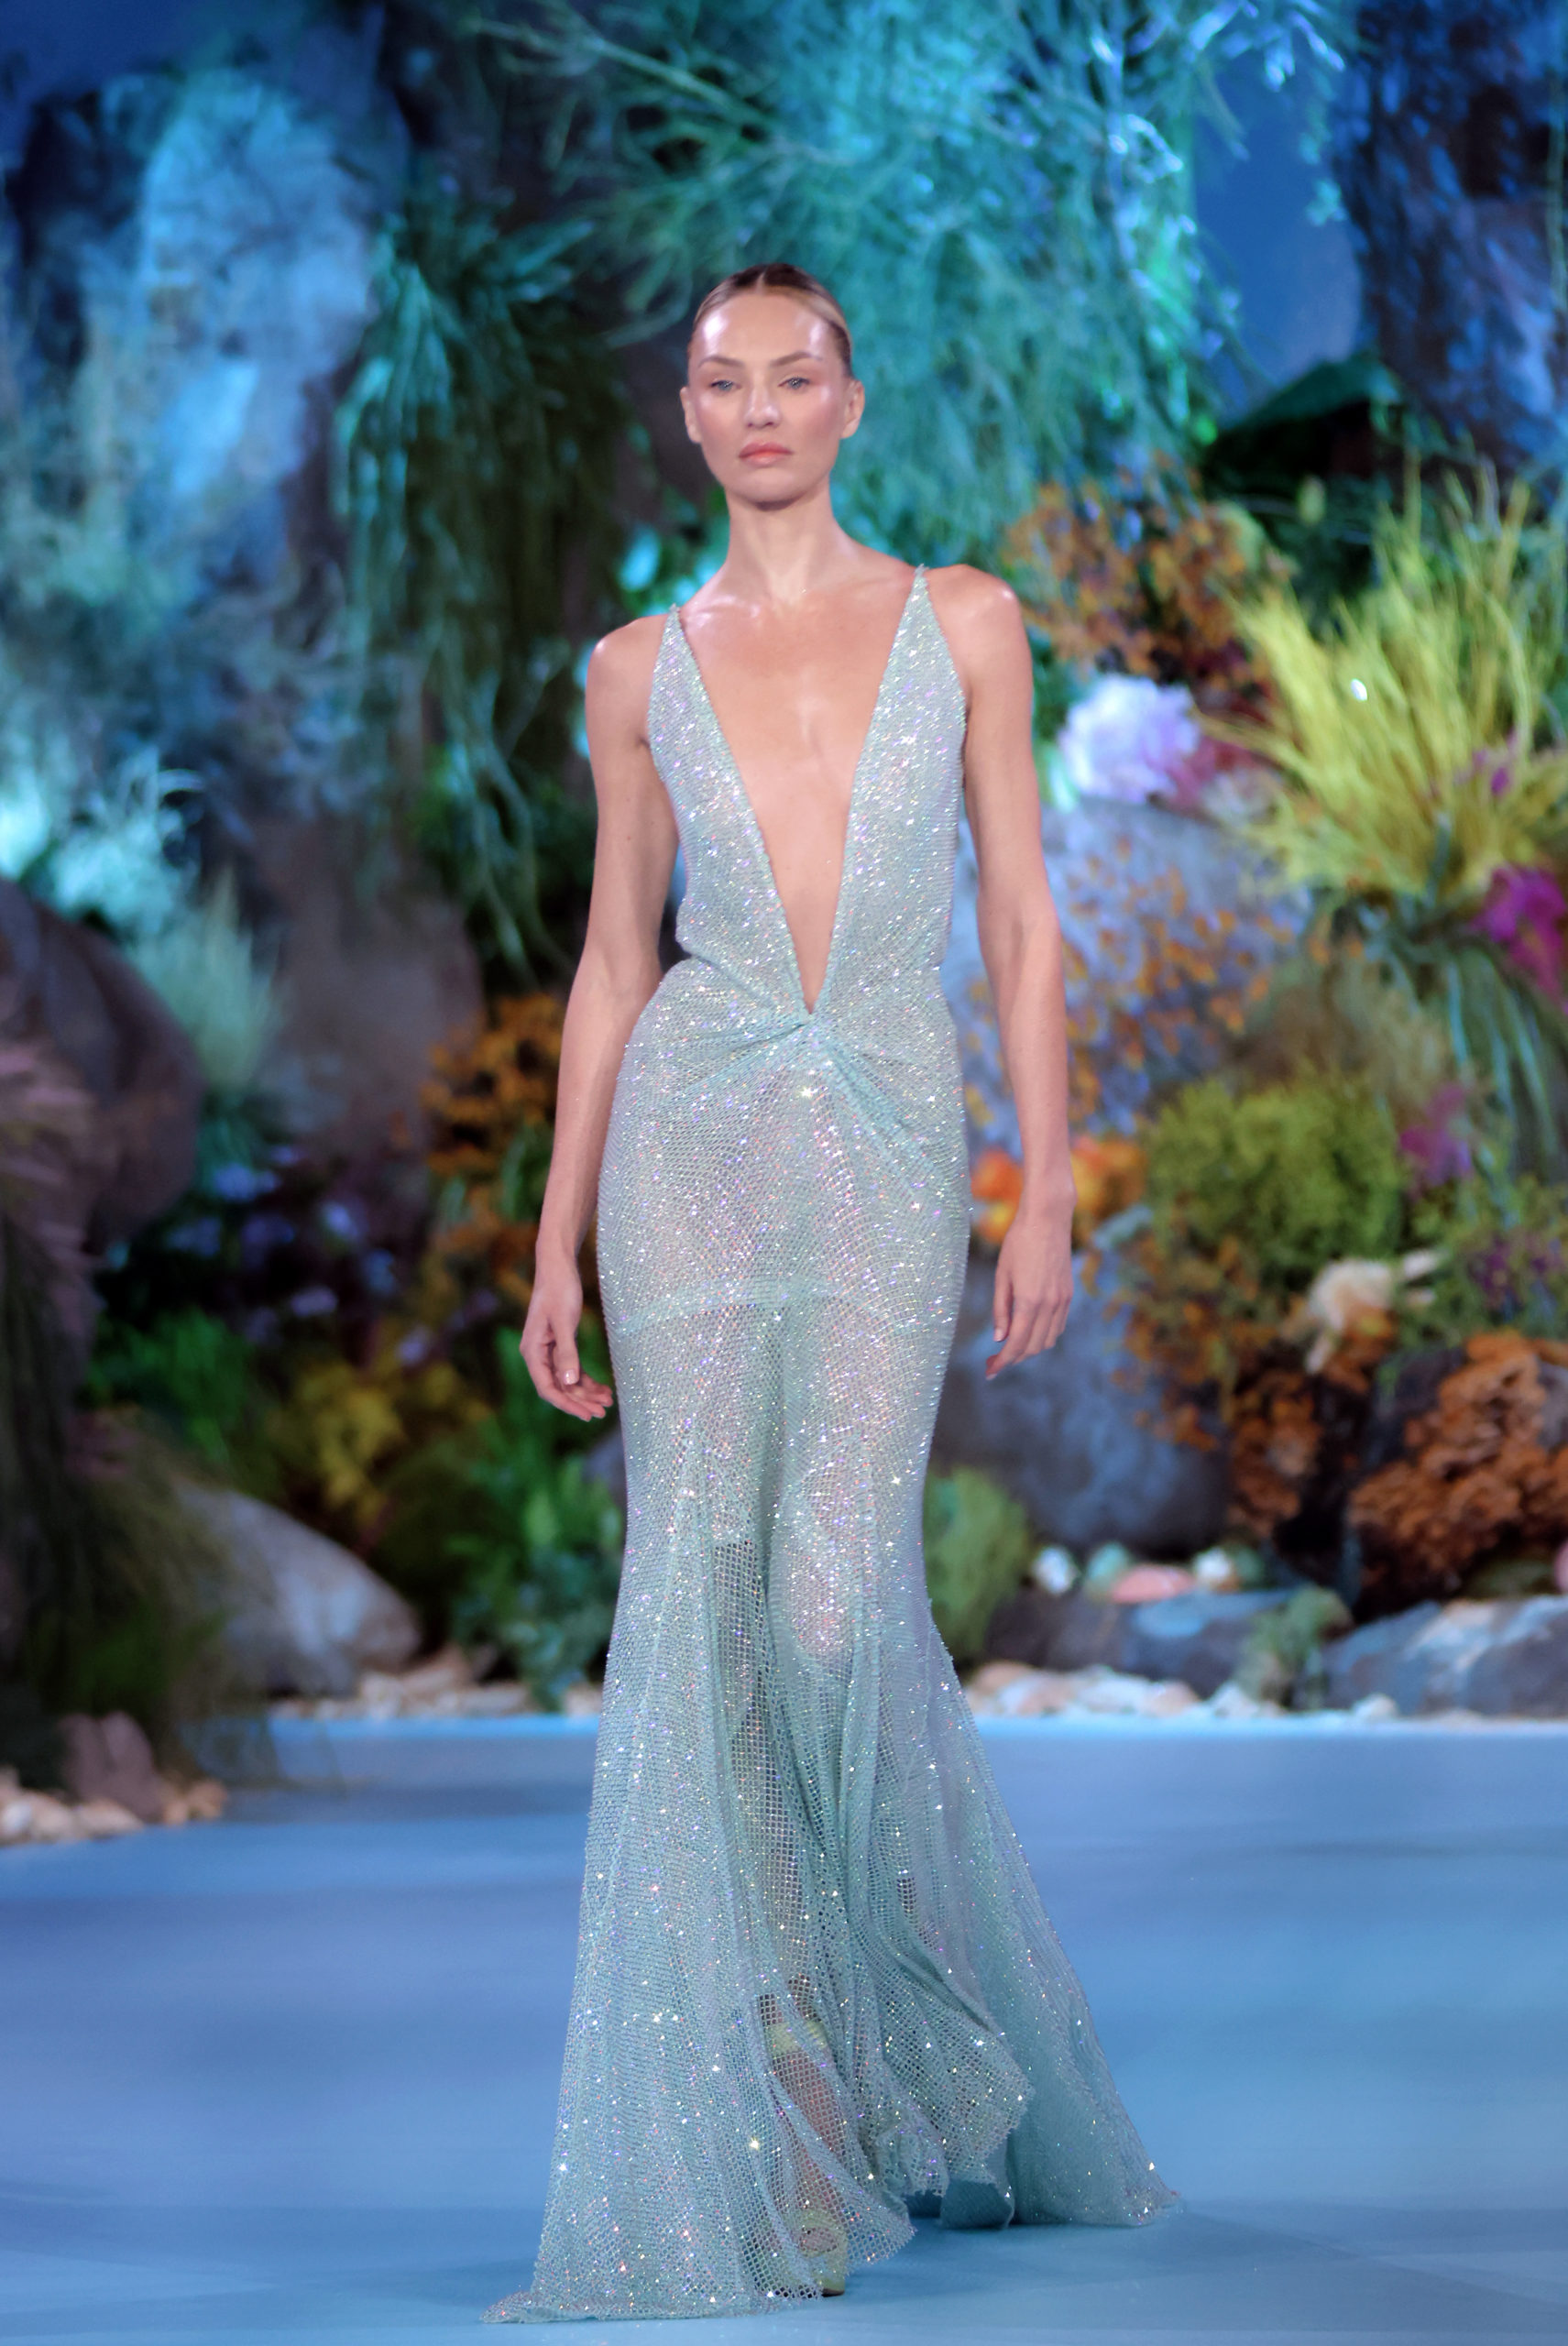 Candice-Swanepoel-in-a-Celia-Kritharioti-Couture-mermaid-inspired-creation